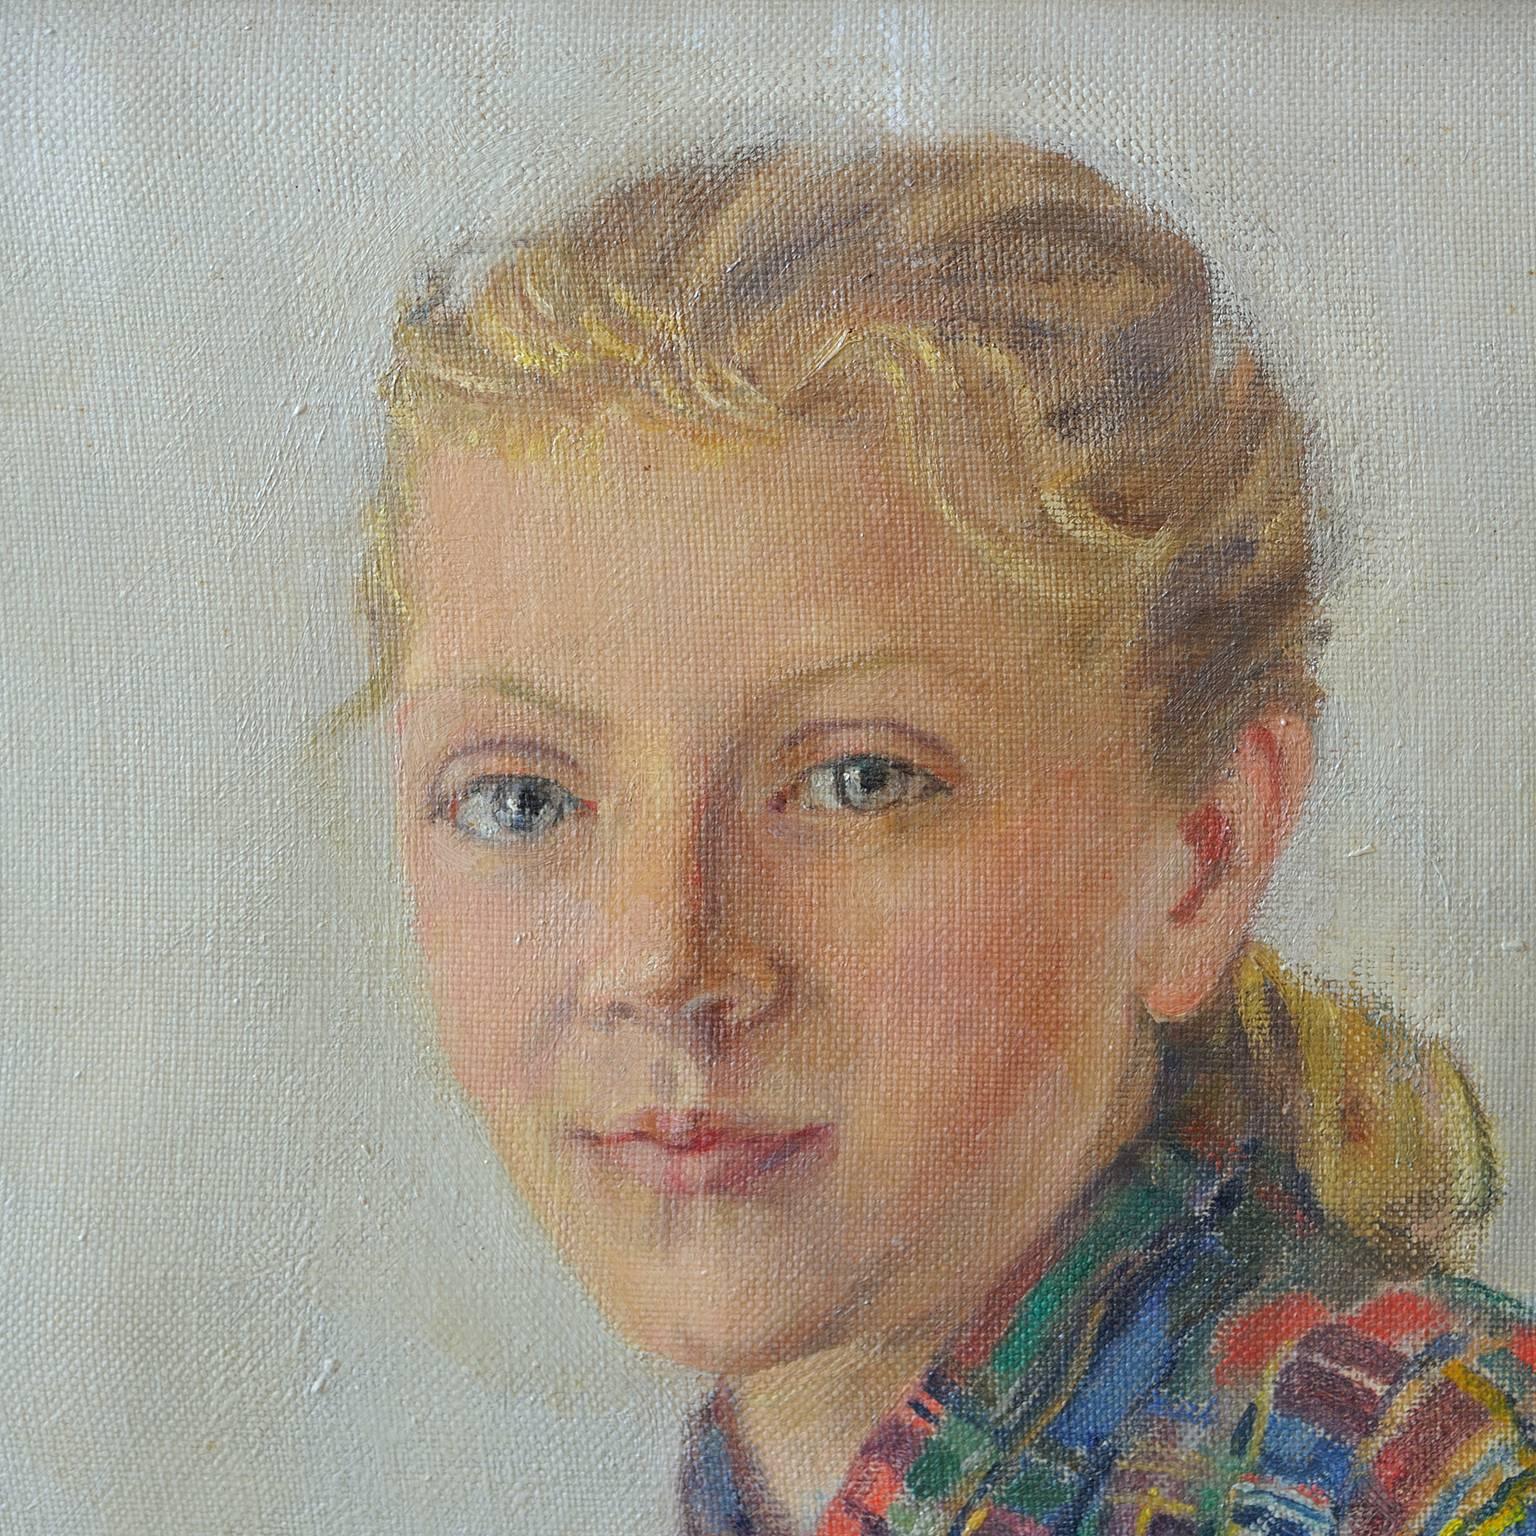 A fine quality, very appealing and sensitive oil on canvas, mid-20th century framed portrait of a young girl "Penny," by the English artist, Jean Winifred Inglis, (British 1884 - 1959) from Stroud in Gloucestershire 1884-1959.